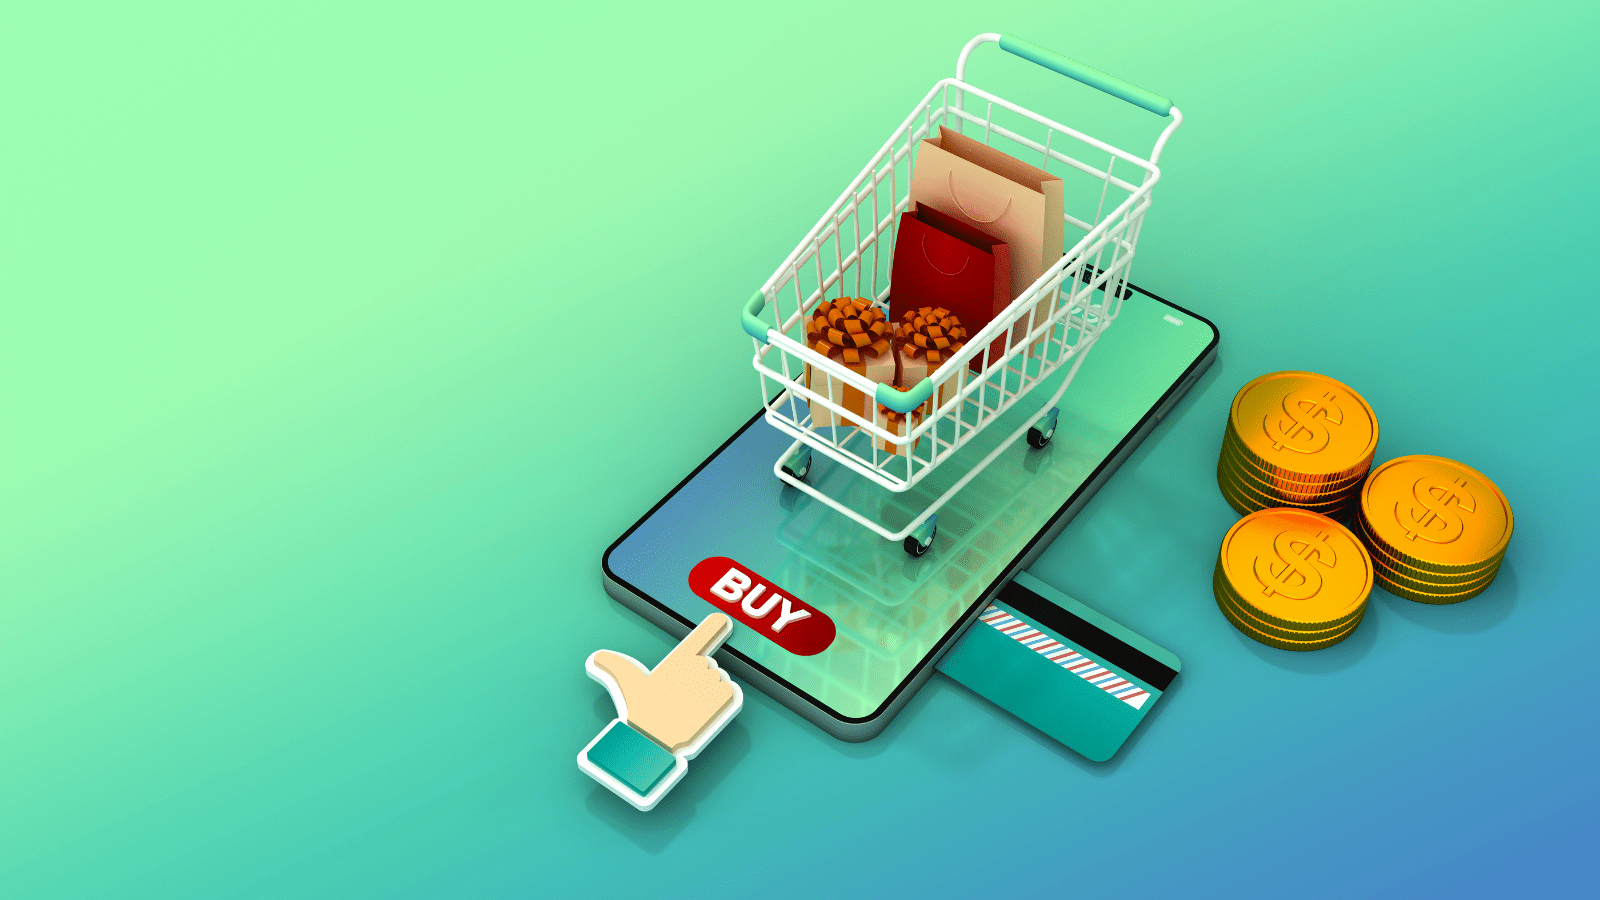 Improve Checkout Conversion by Transforming the Ecommerce Experience | Bolt